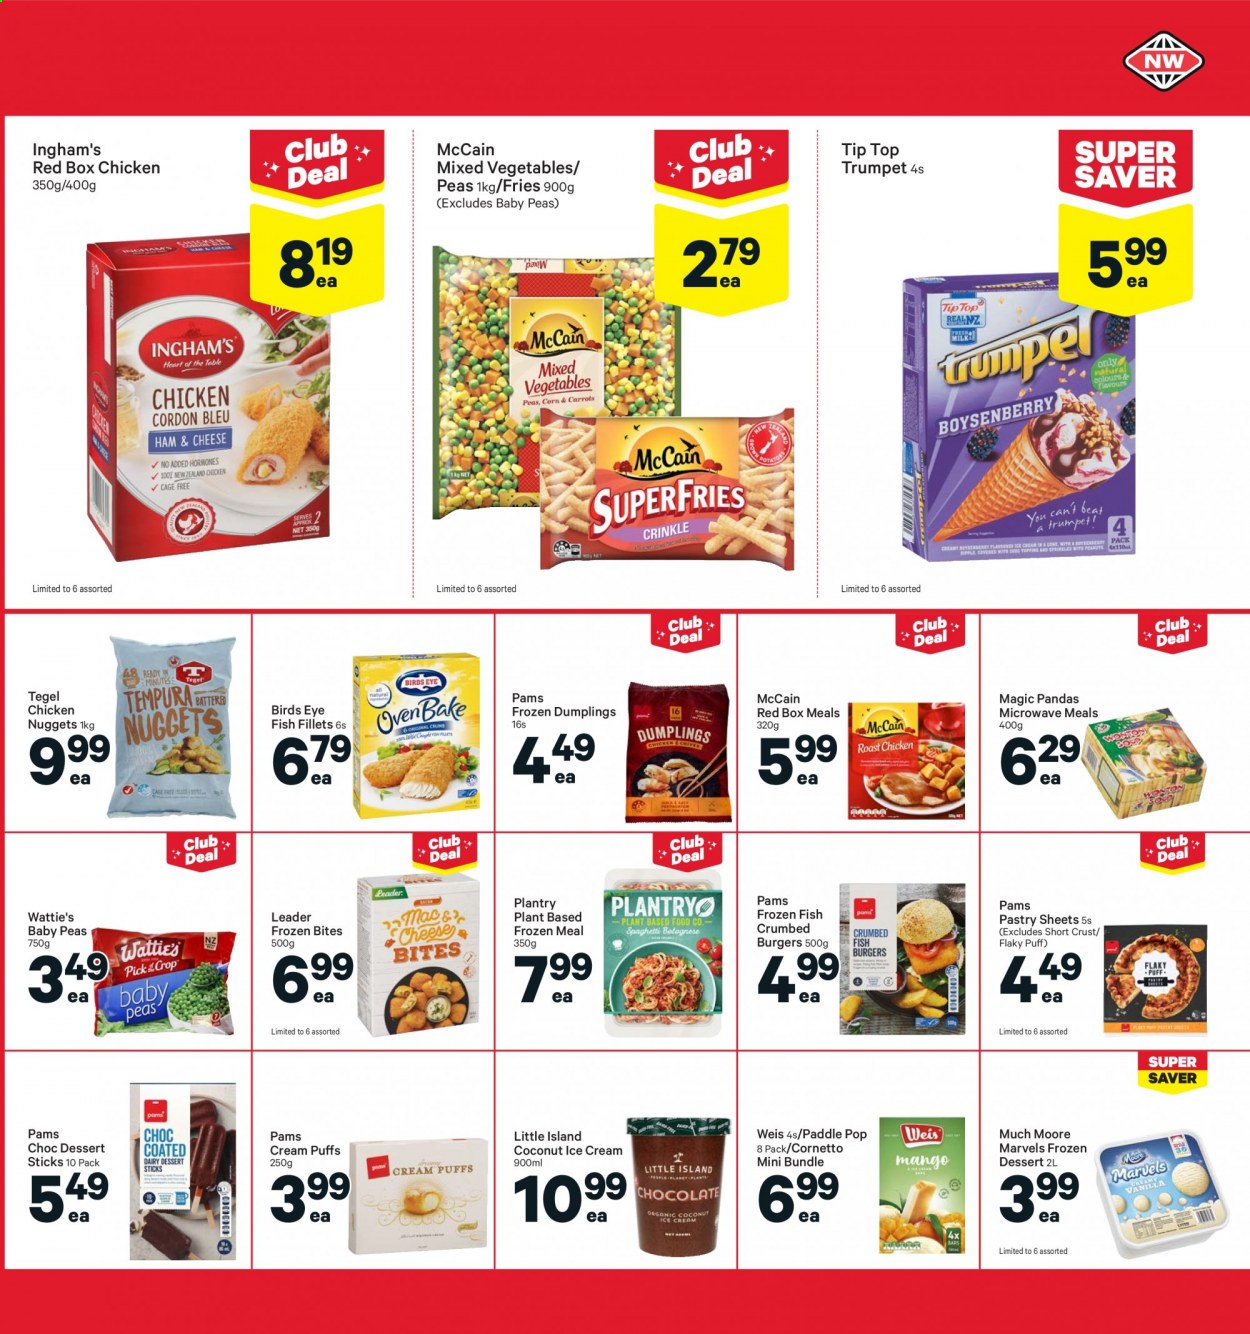 thumbnail - New World mailer - 09.08.2021 - 15.08.2021 - Sales products - Tip Top, puffs, cream puffs, peas, coconut, fish fillets, fish, nuggets, hamburger, chicken nuggets, dumplings, Bird's Eye, Wattie's, ice cream, Cornetto, Much Moore, mixed vegetables, McCain, potato fries. Page 23.